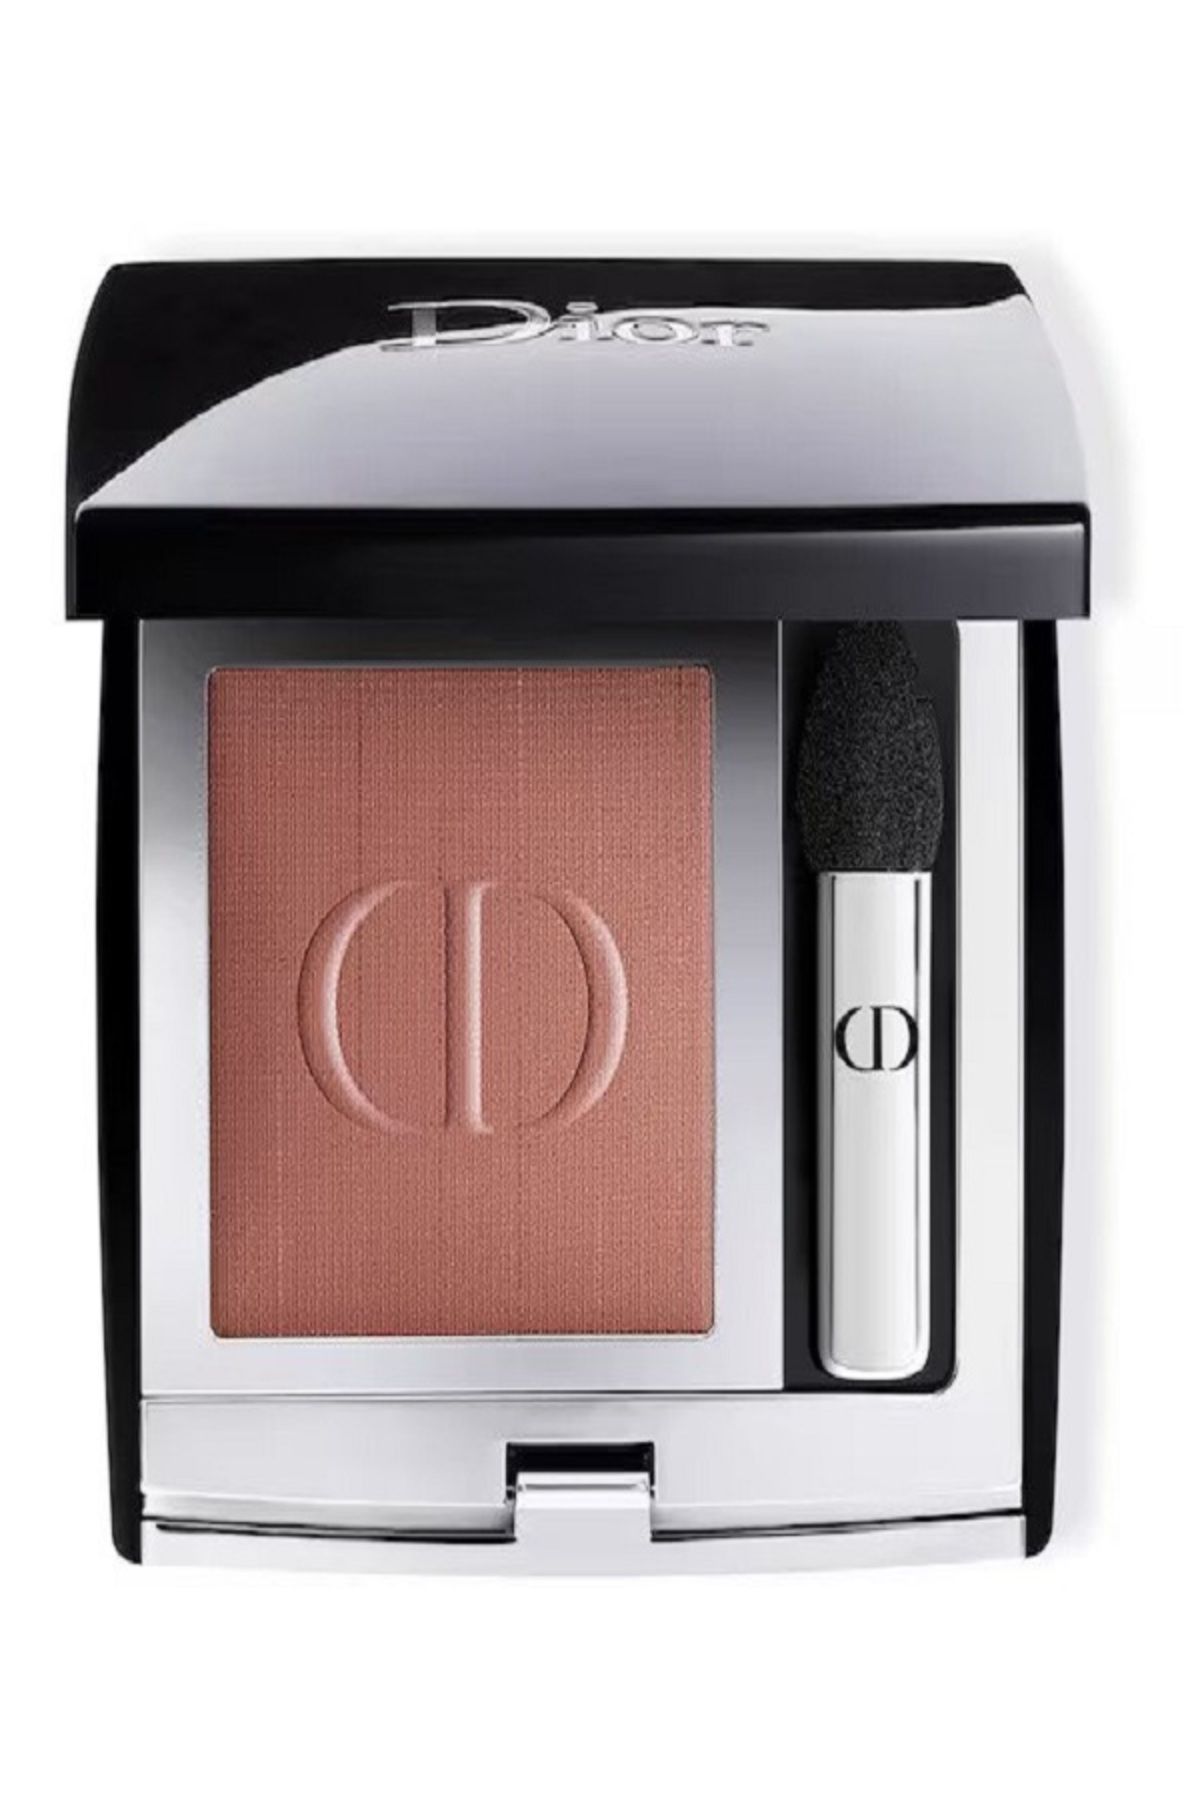 Dior MONO COULEUR COUTURE - ALOE VERA AND PİNE OİL-EYESHADOW THAT PLUMPS THE EYEBROWS 2 GR PSSN2104